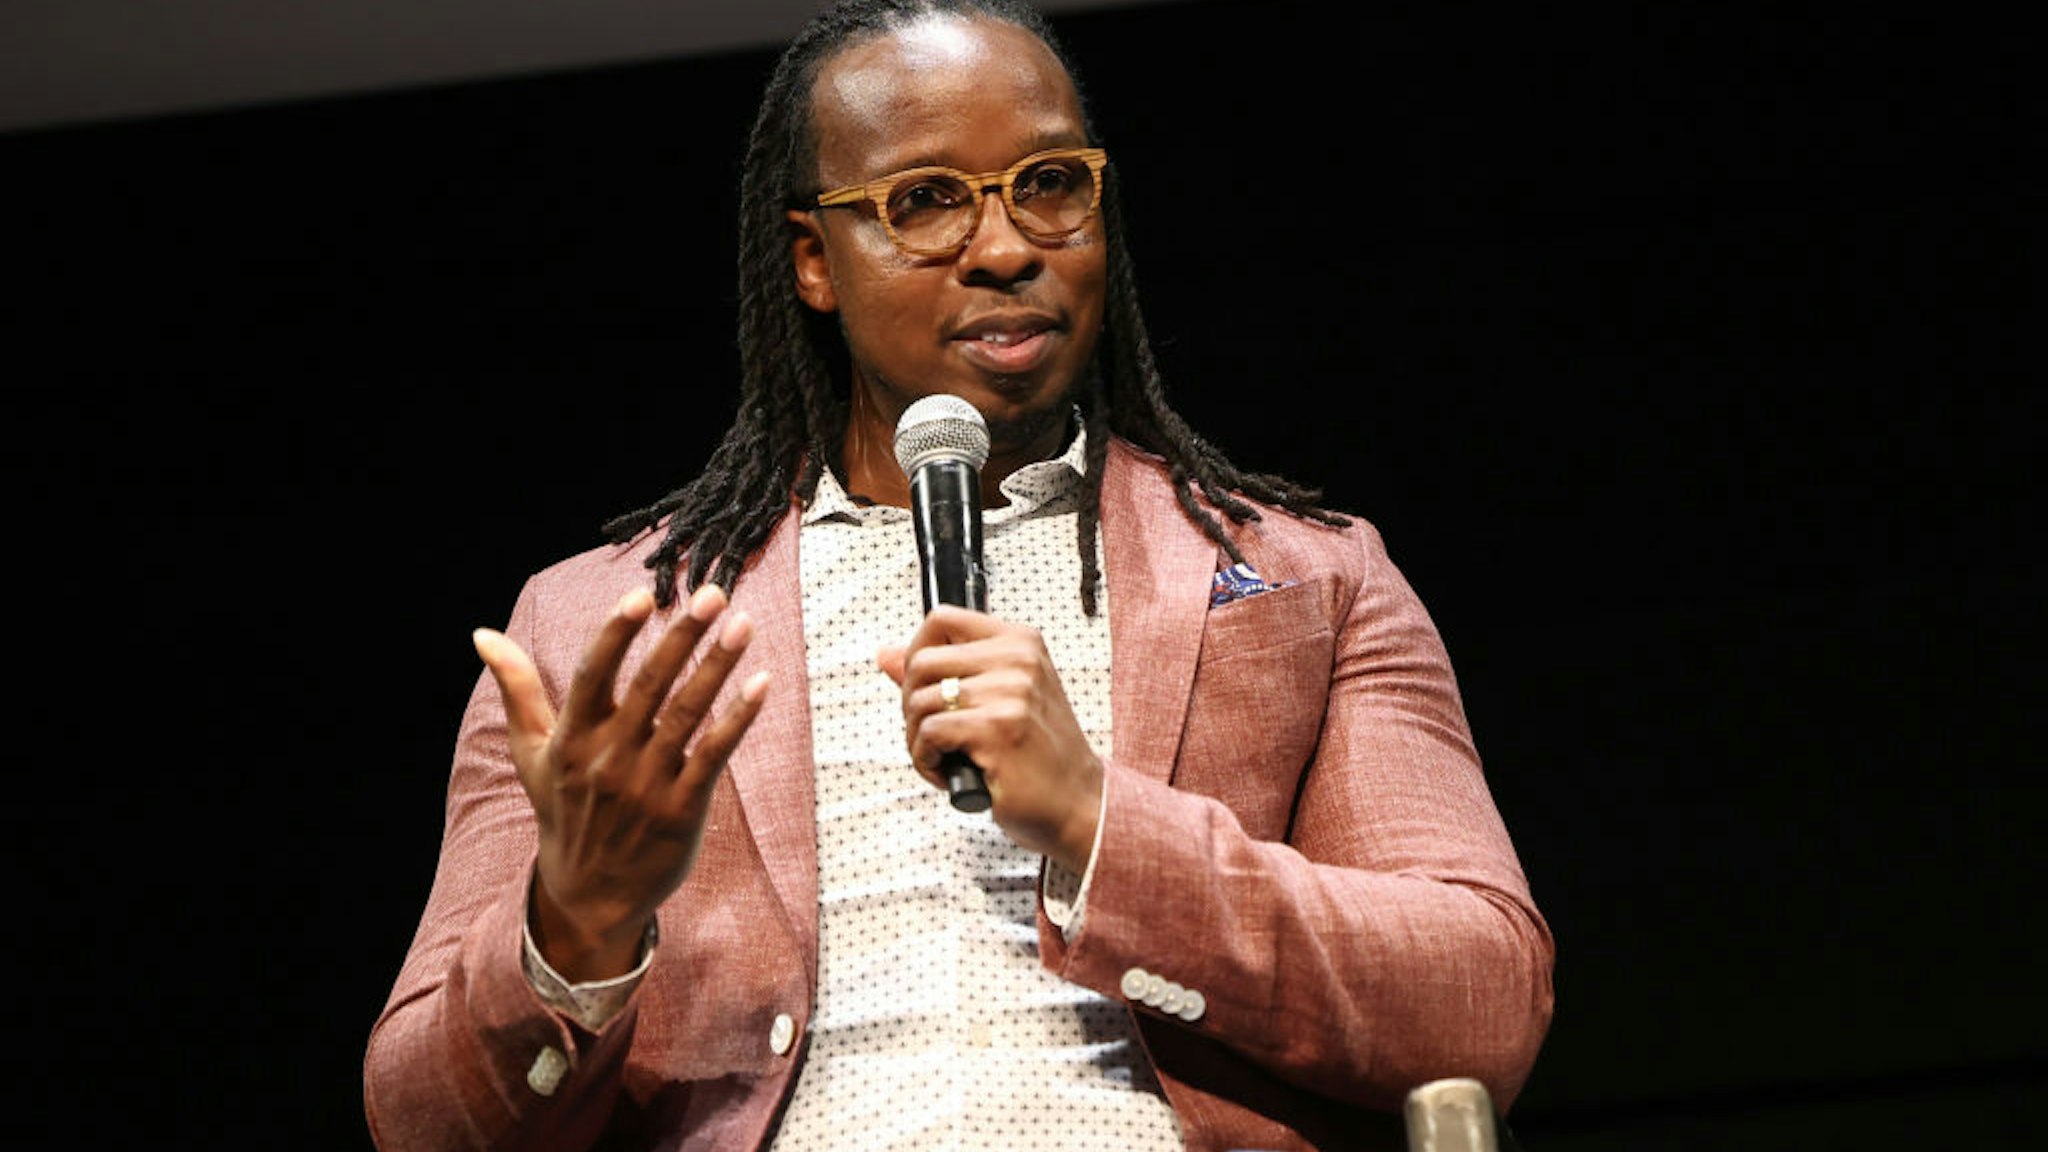 TORONTO, ONTARIO - SEPTEMBER 09: Dr. Ibram X. Kendi speaks onstage during Netflix's "Stamped From The Beginning" world premiere during the Toronto International Film Festival at TIFF Bell Lightbox on September 09, 2023 in Toronto, Ontario.